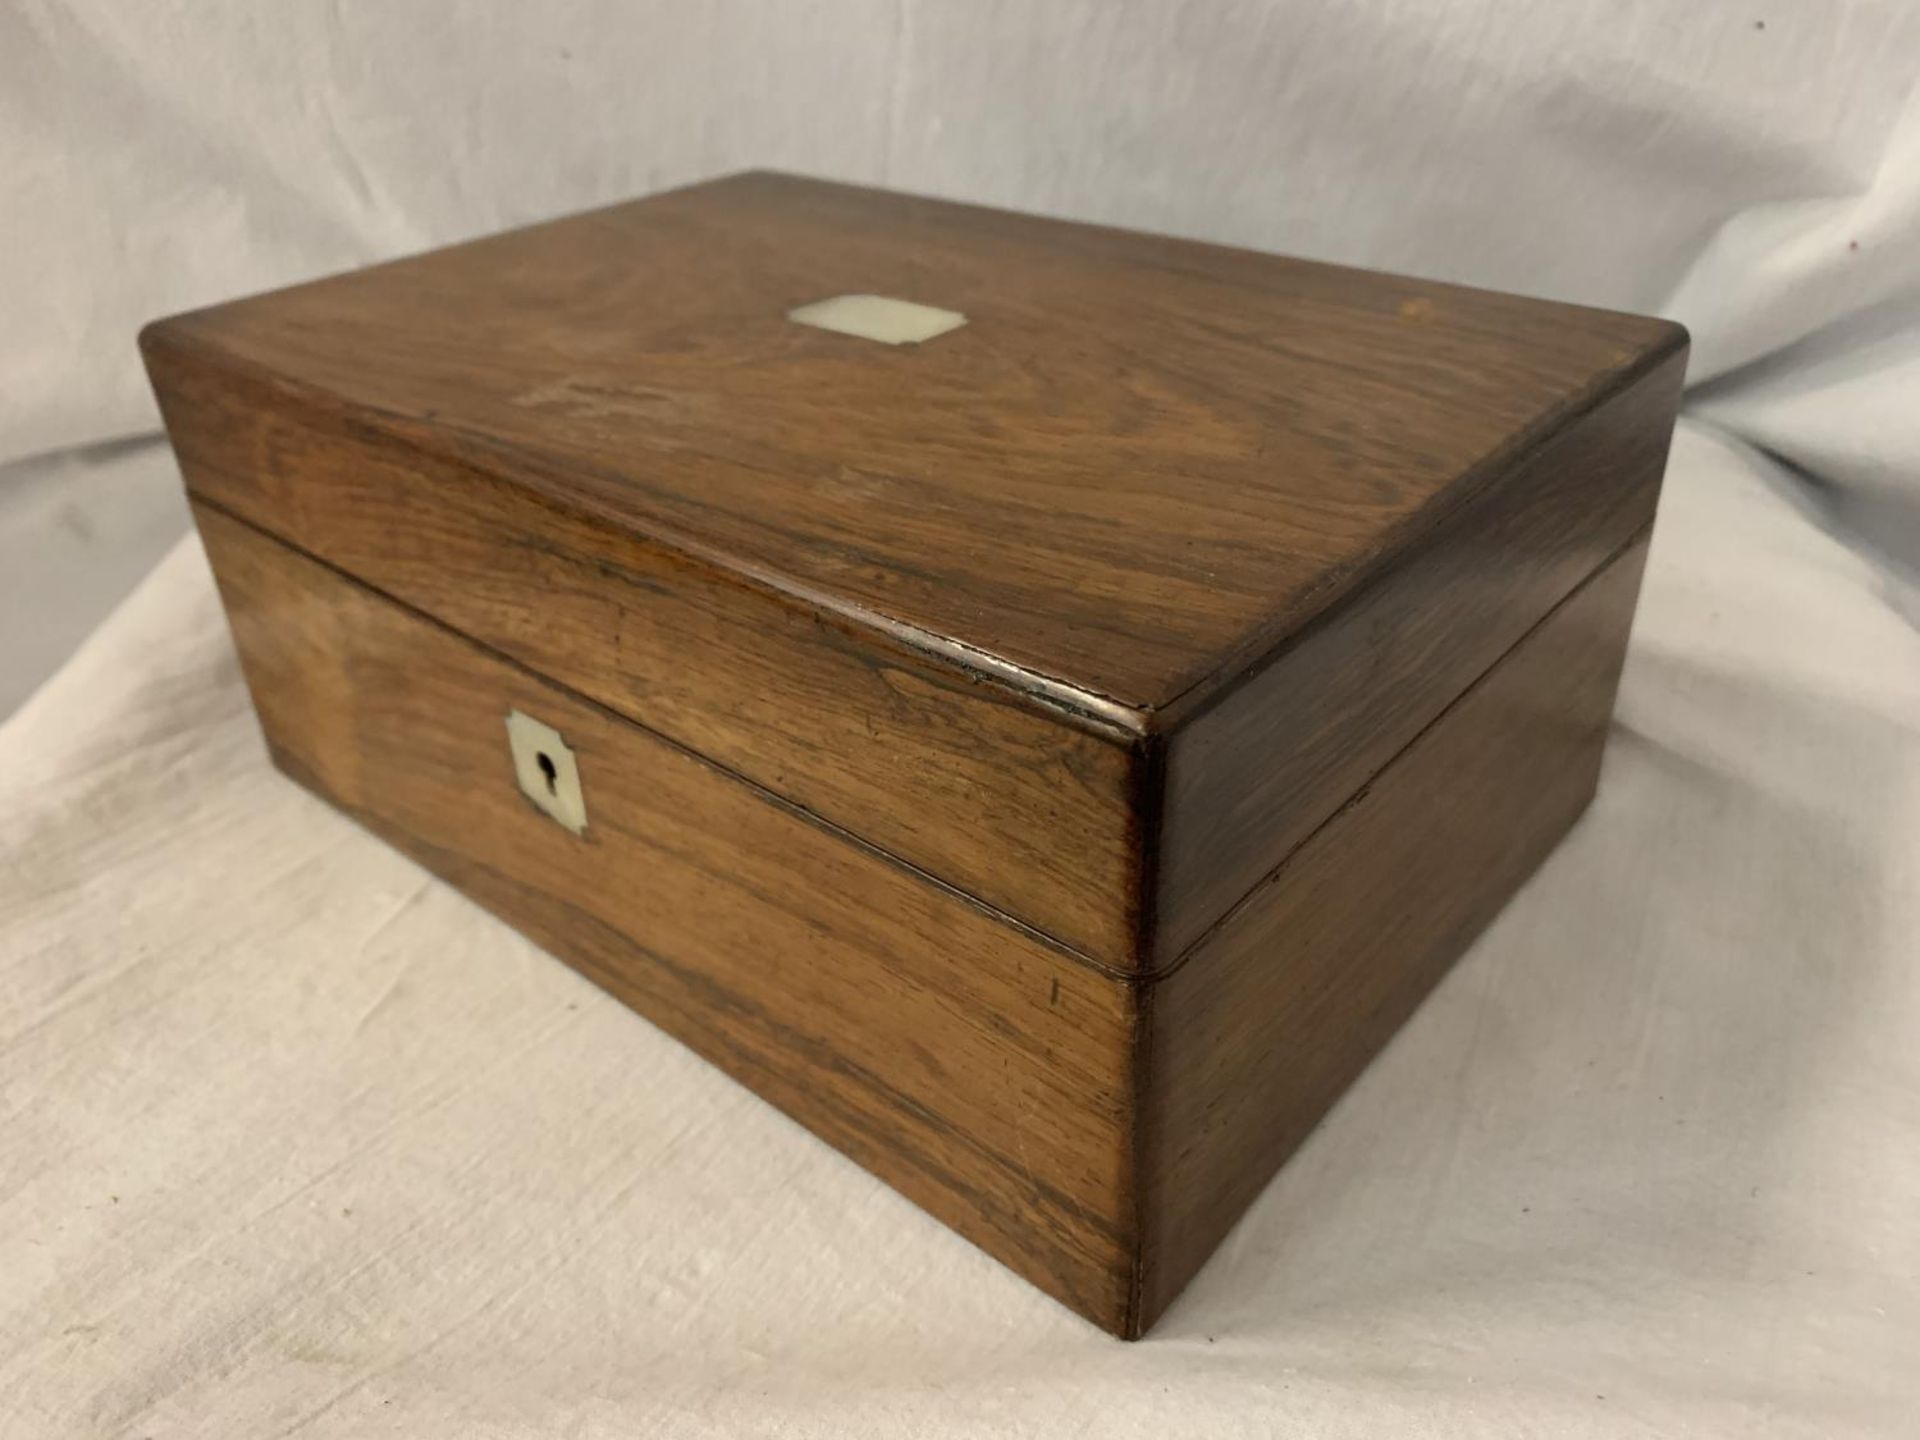 A VINTAGE MAHOGANY BOX WITH MOTHER OF PEARL INLAID STAMP 1705CM X 14.5CM X 24.5CM - Image 2 of 3